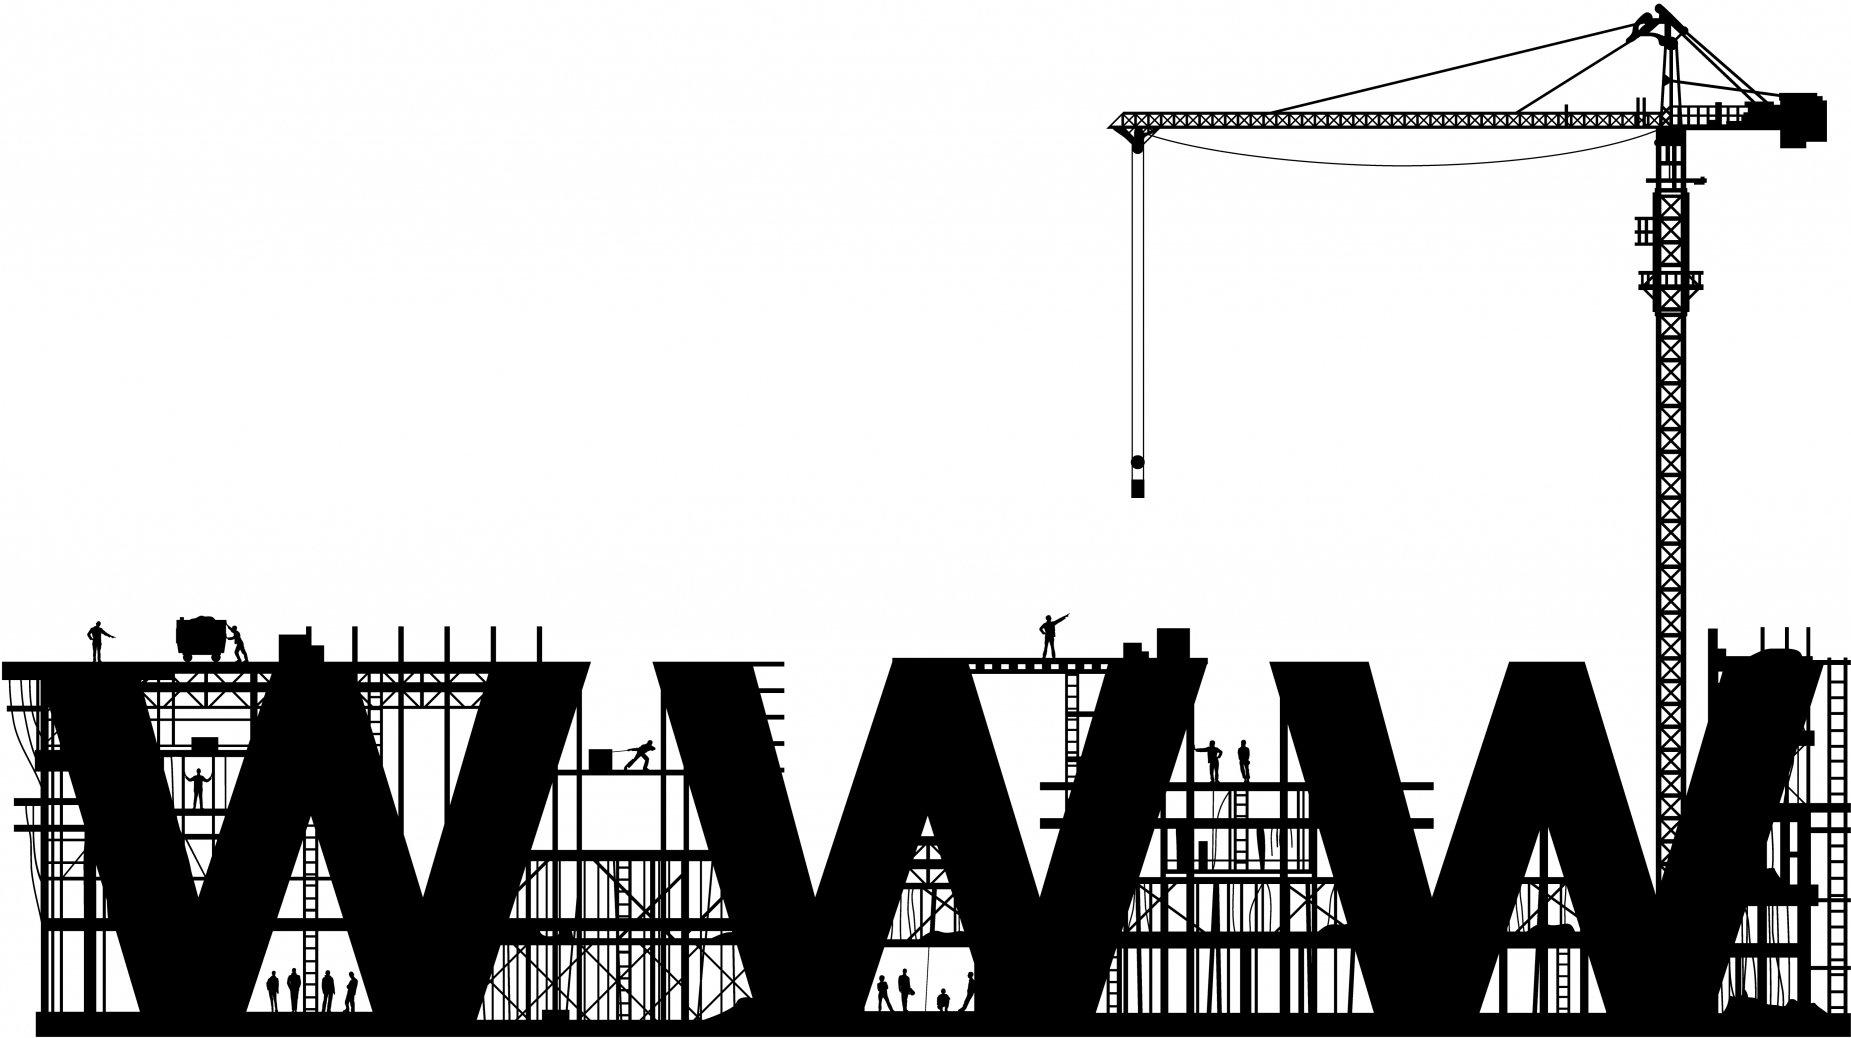 Website Under Construction HD Wallpaper and Background Image